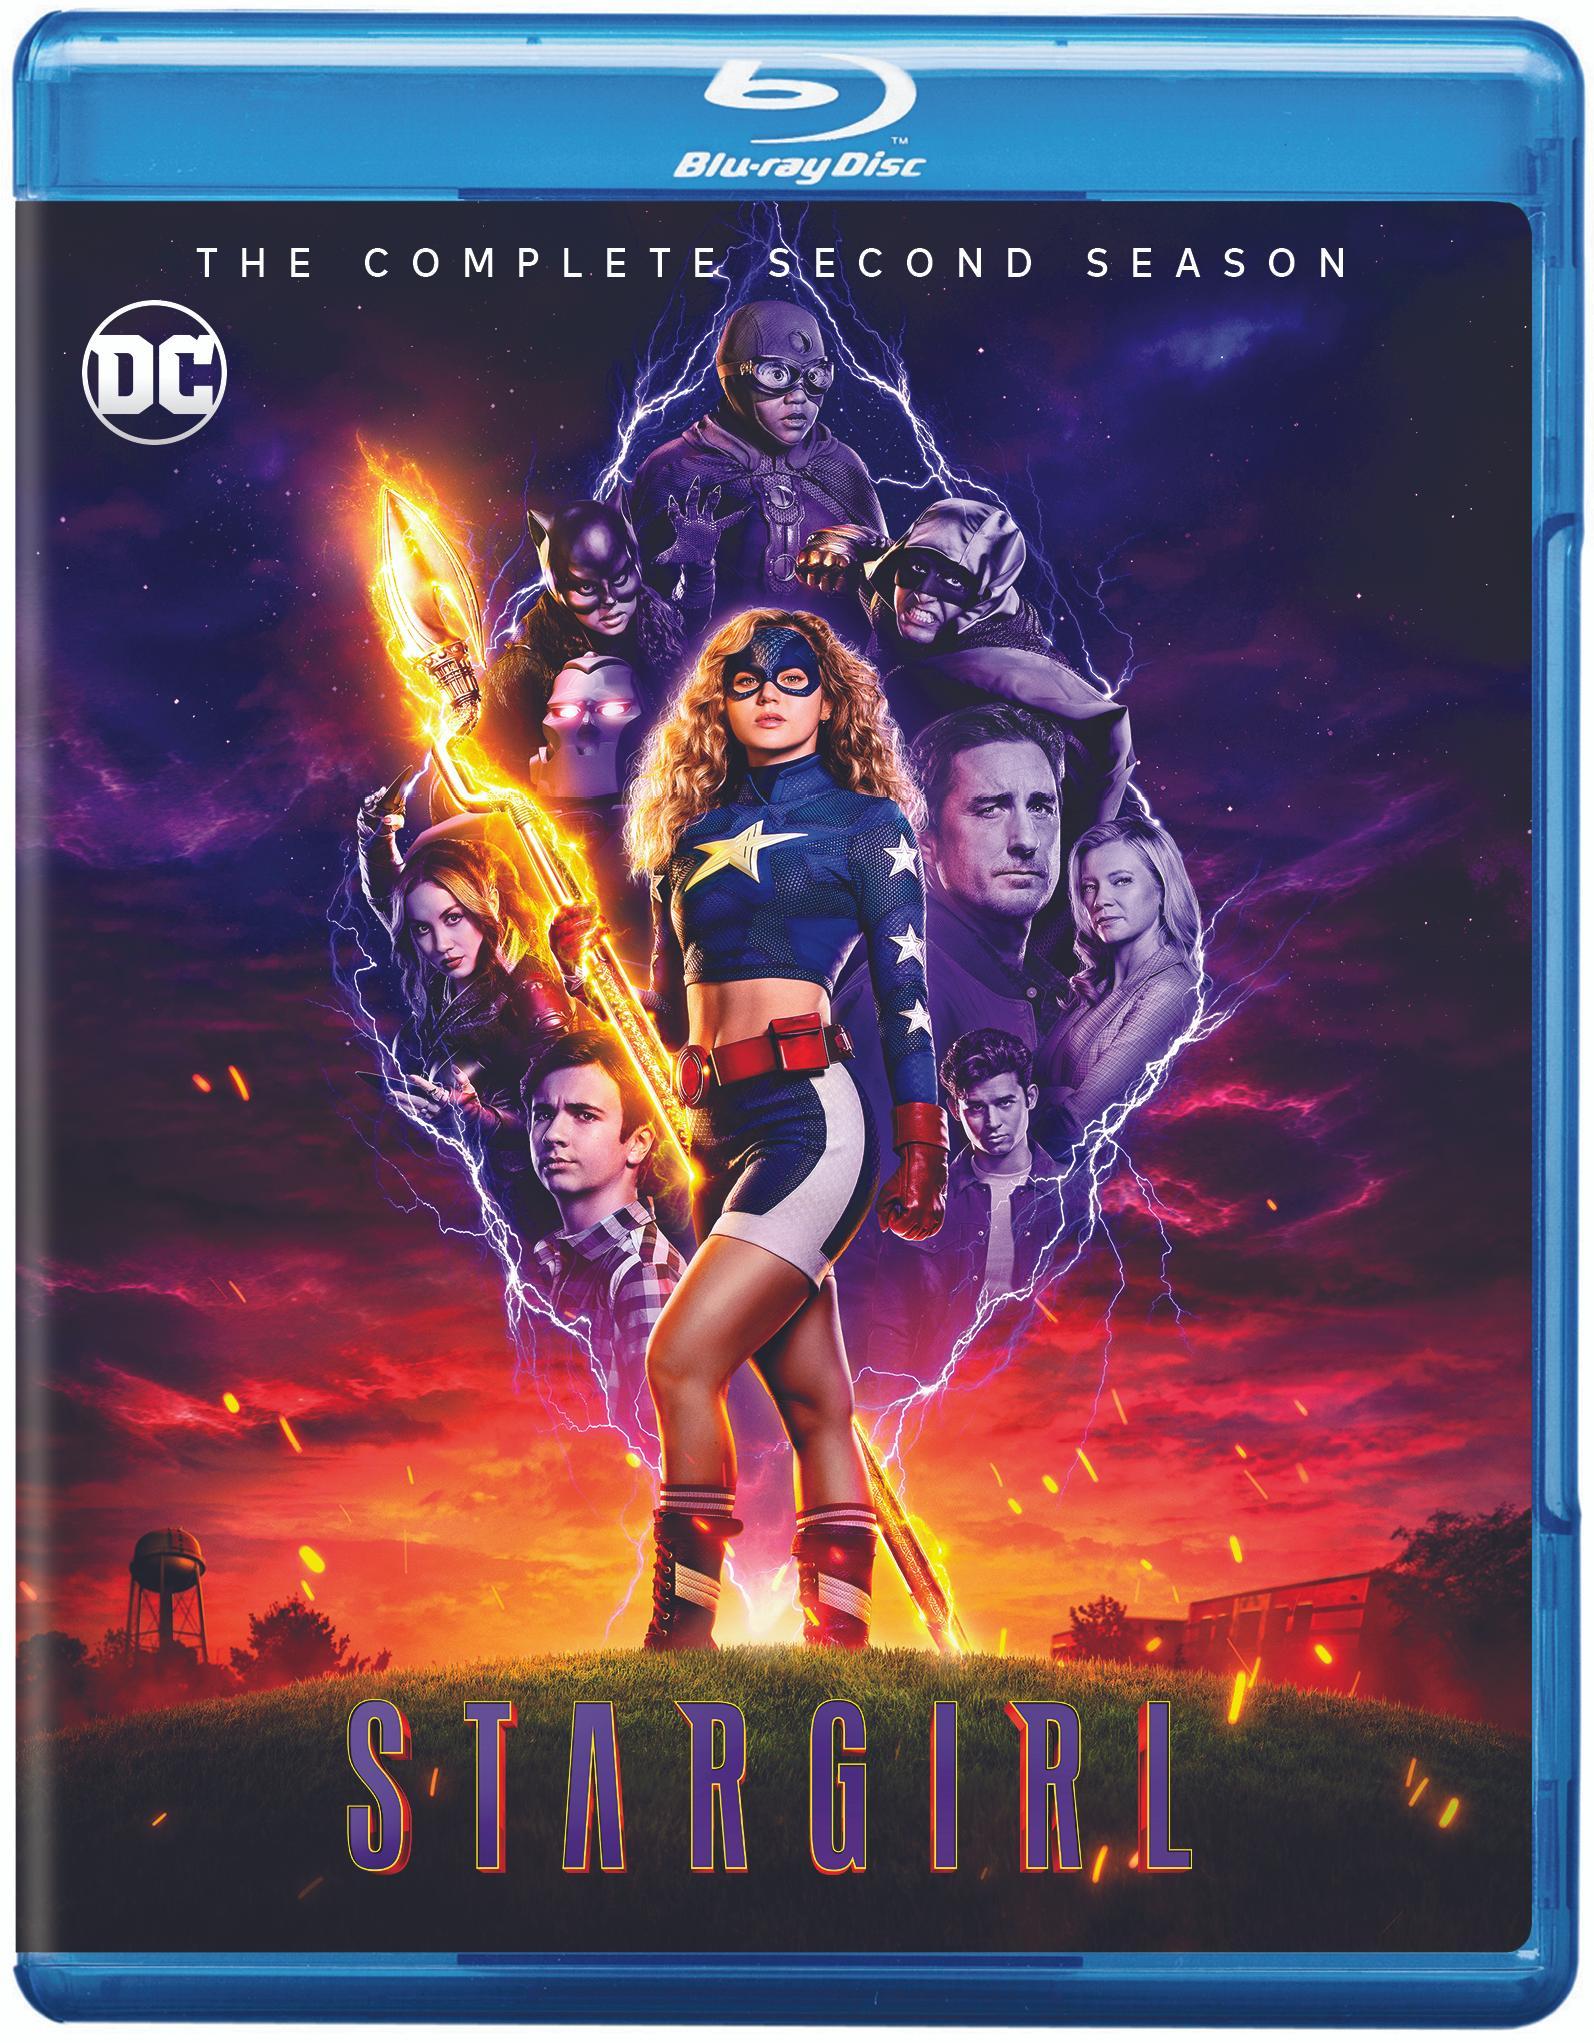 Stargirl: The Complete Second Season (Box Set) - Blu-ray [ 2021 ]  - Sci Fi Television On Blu-ray - TV Shows On GRUV